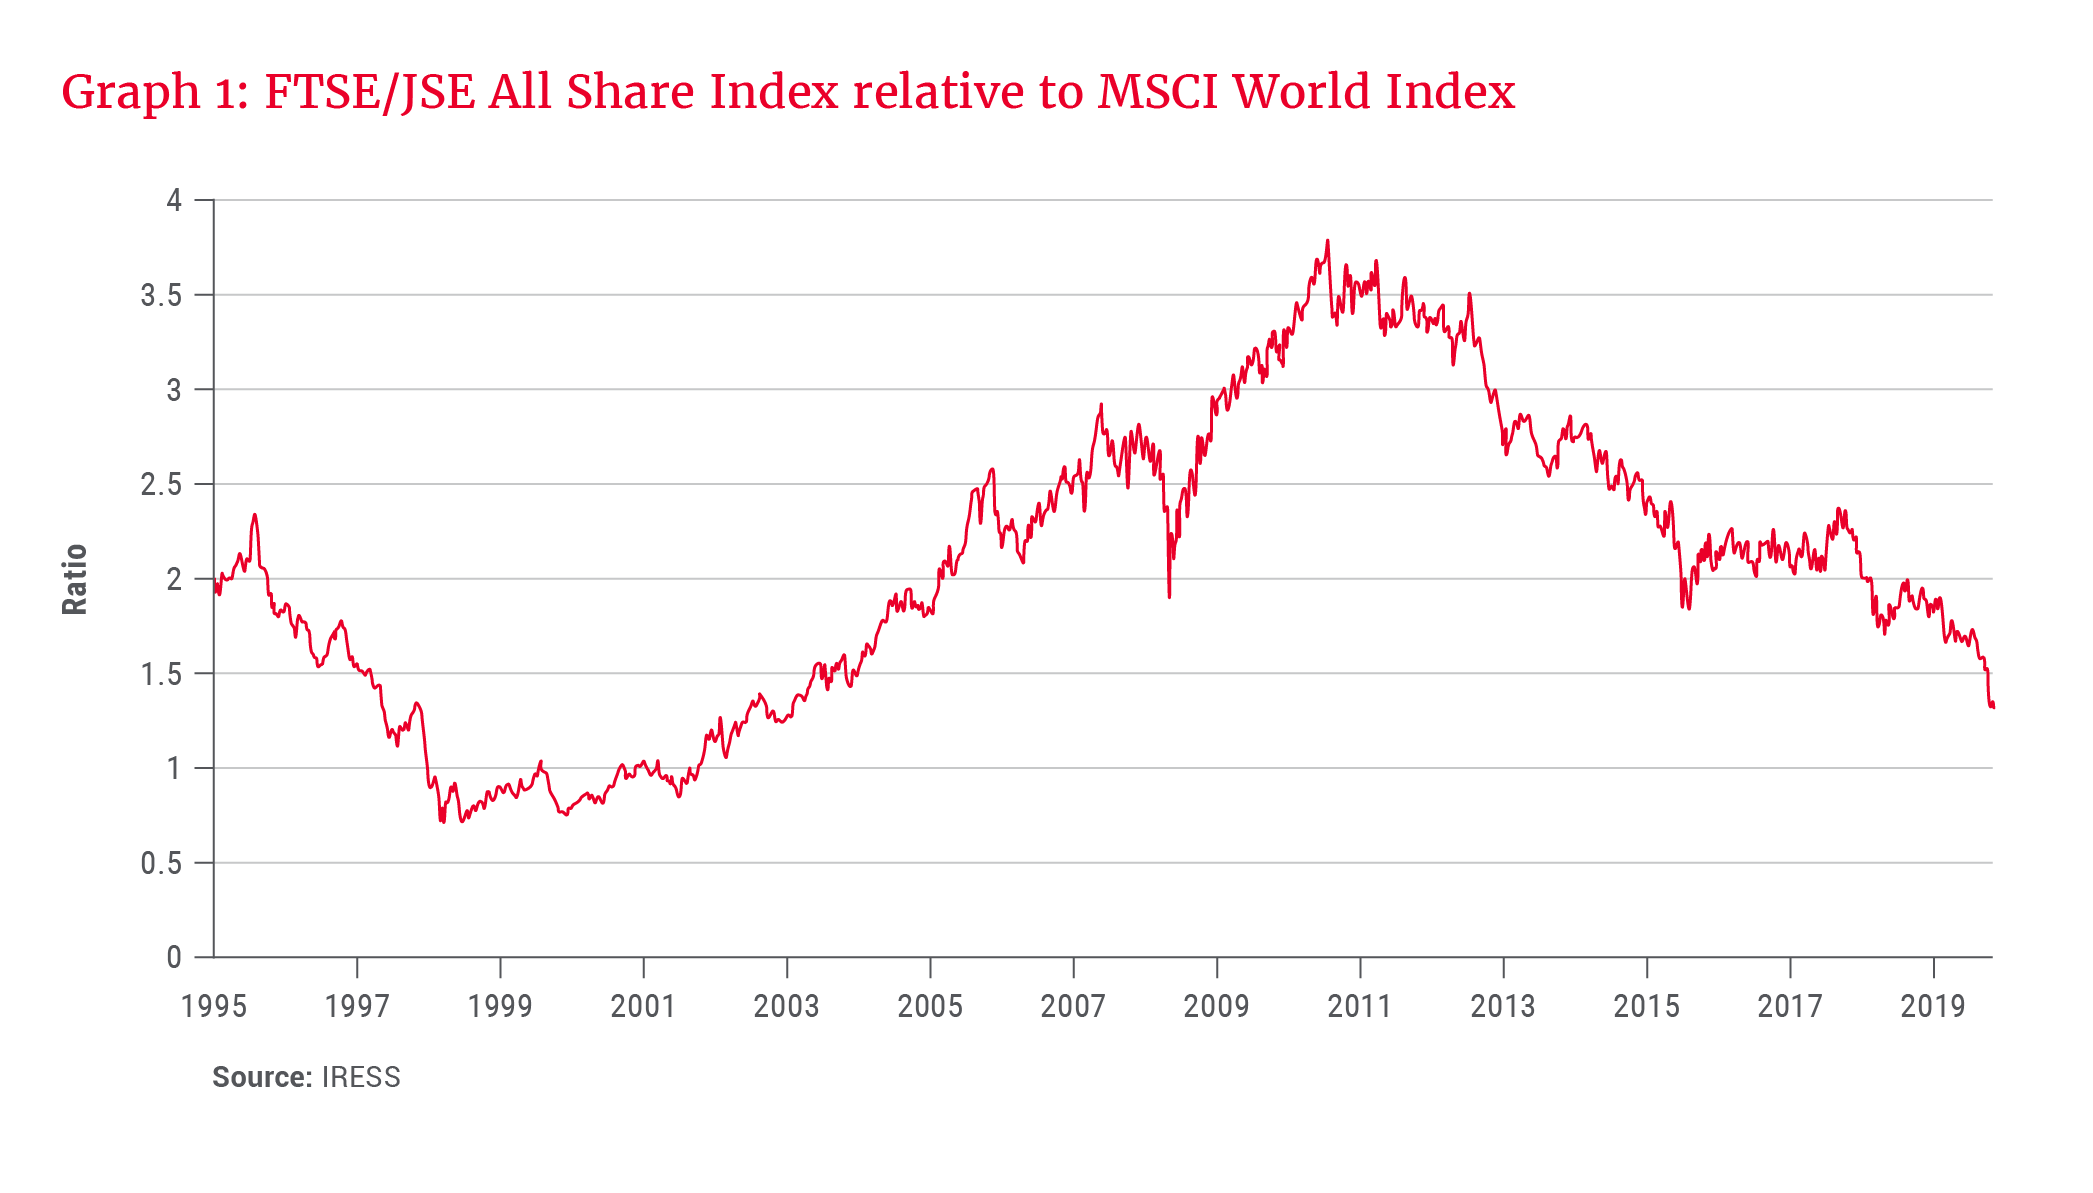 FTSE/JSE All Share Index relative to MSCI World Index - Allan Gray